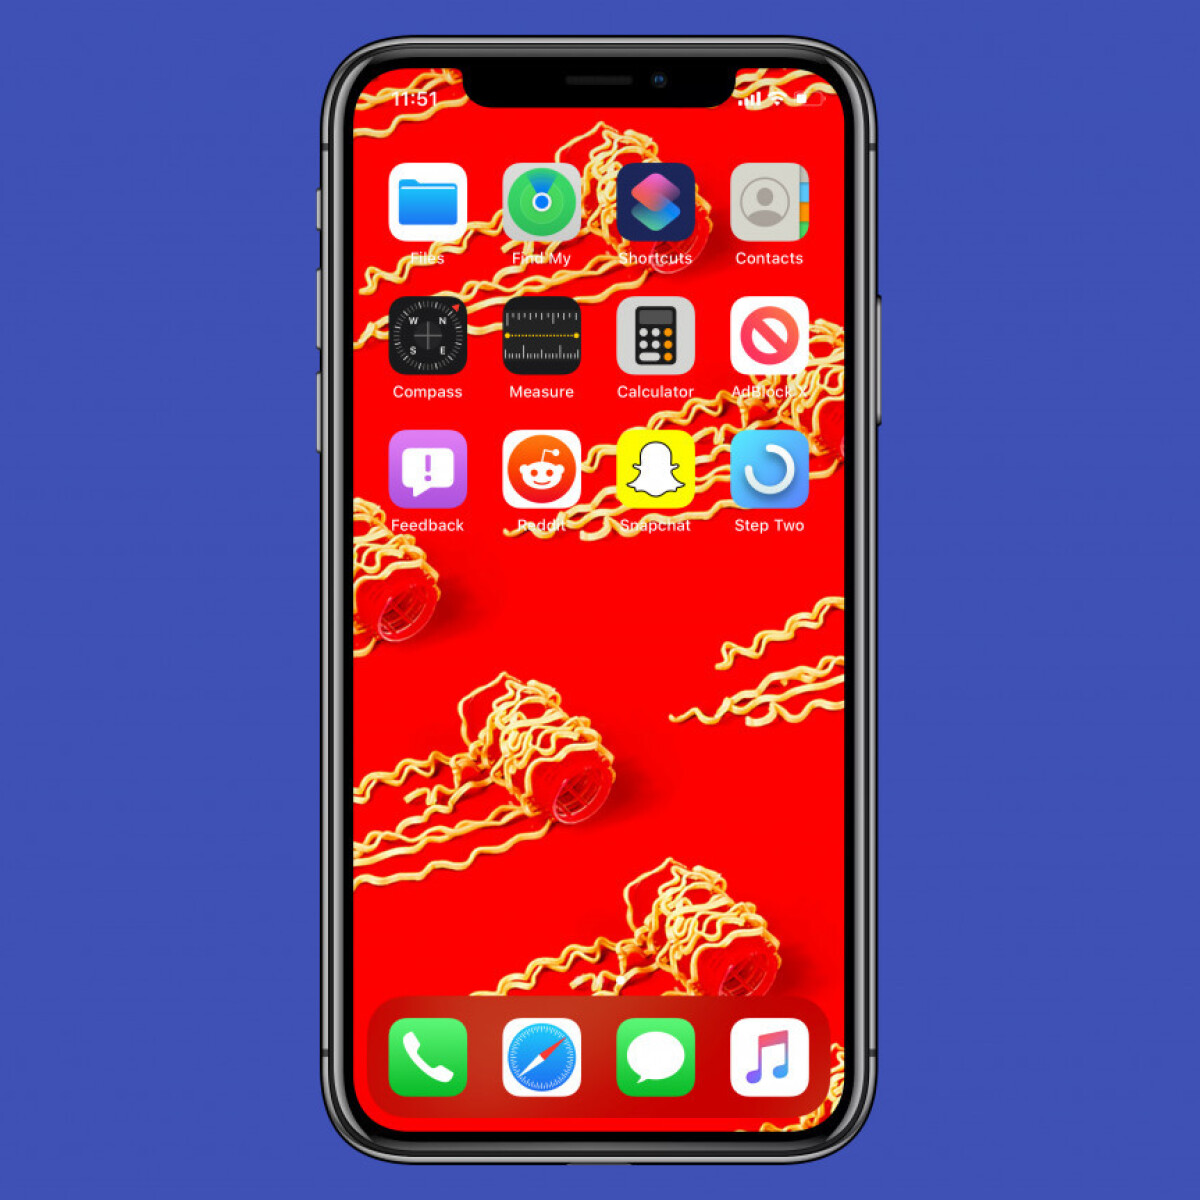 Cool Ios Wallpapers